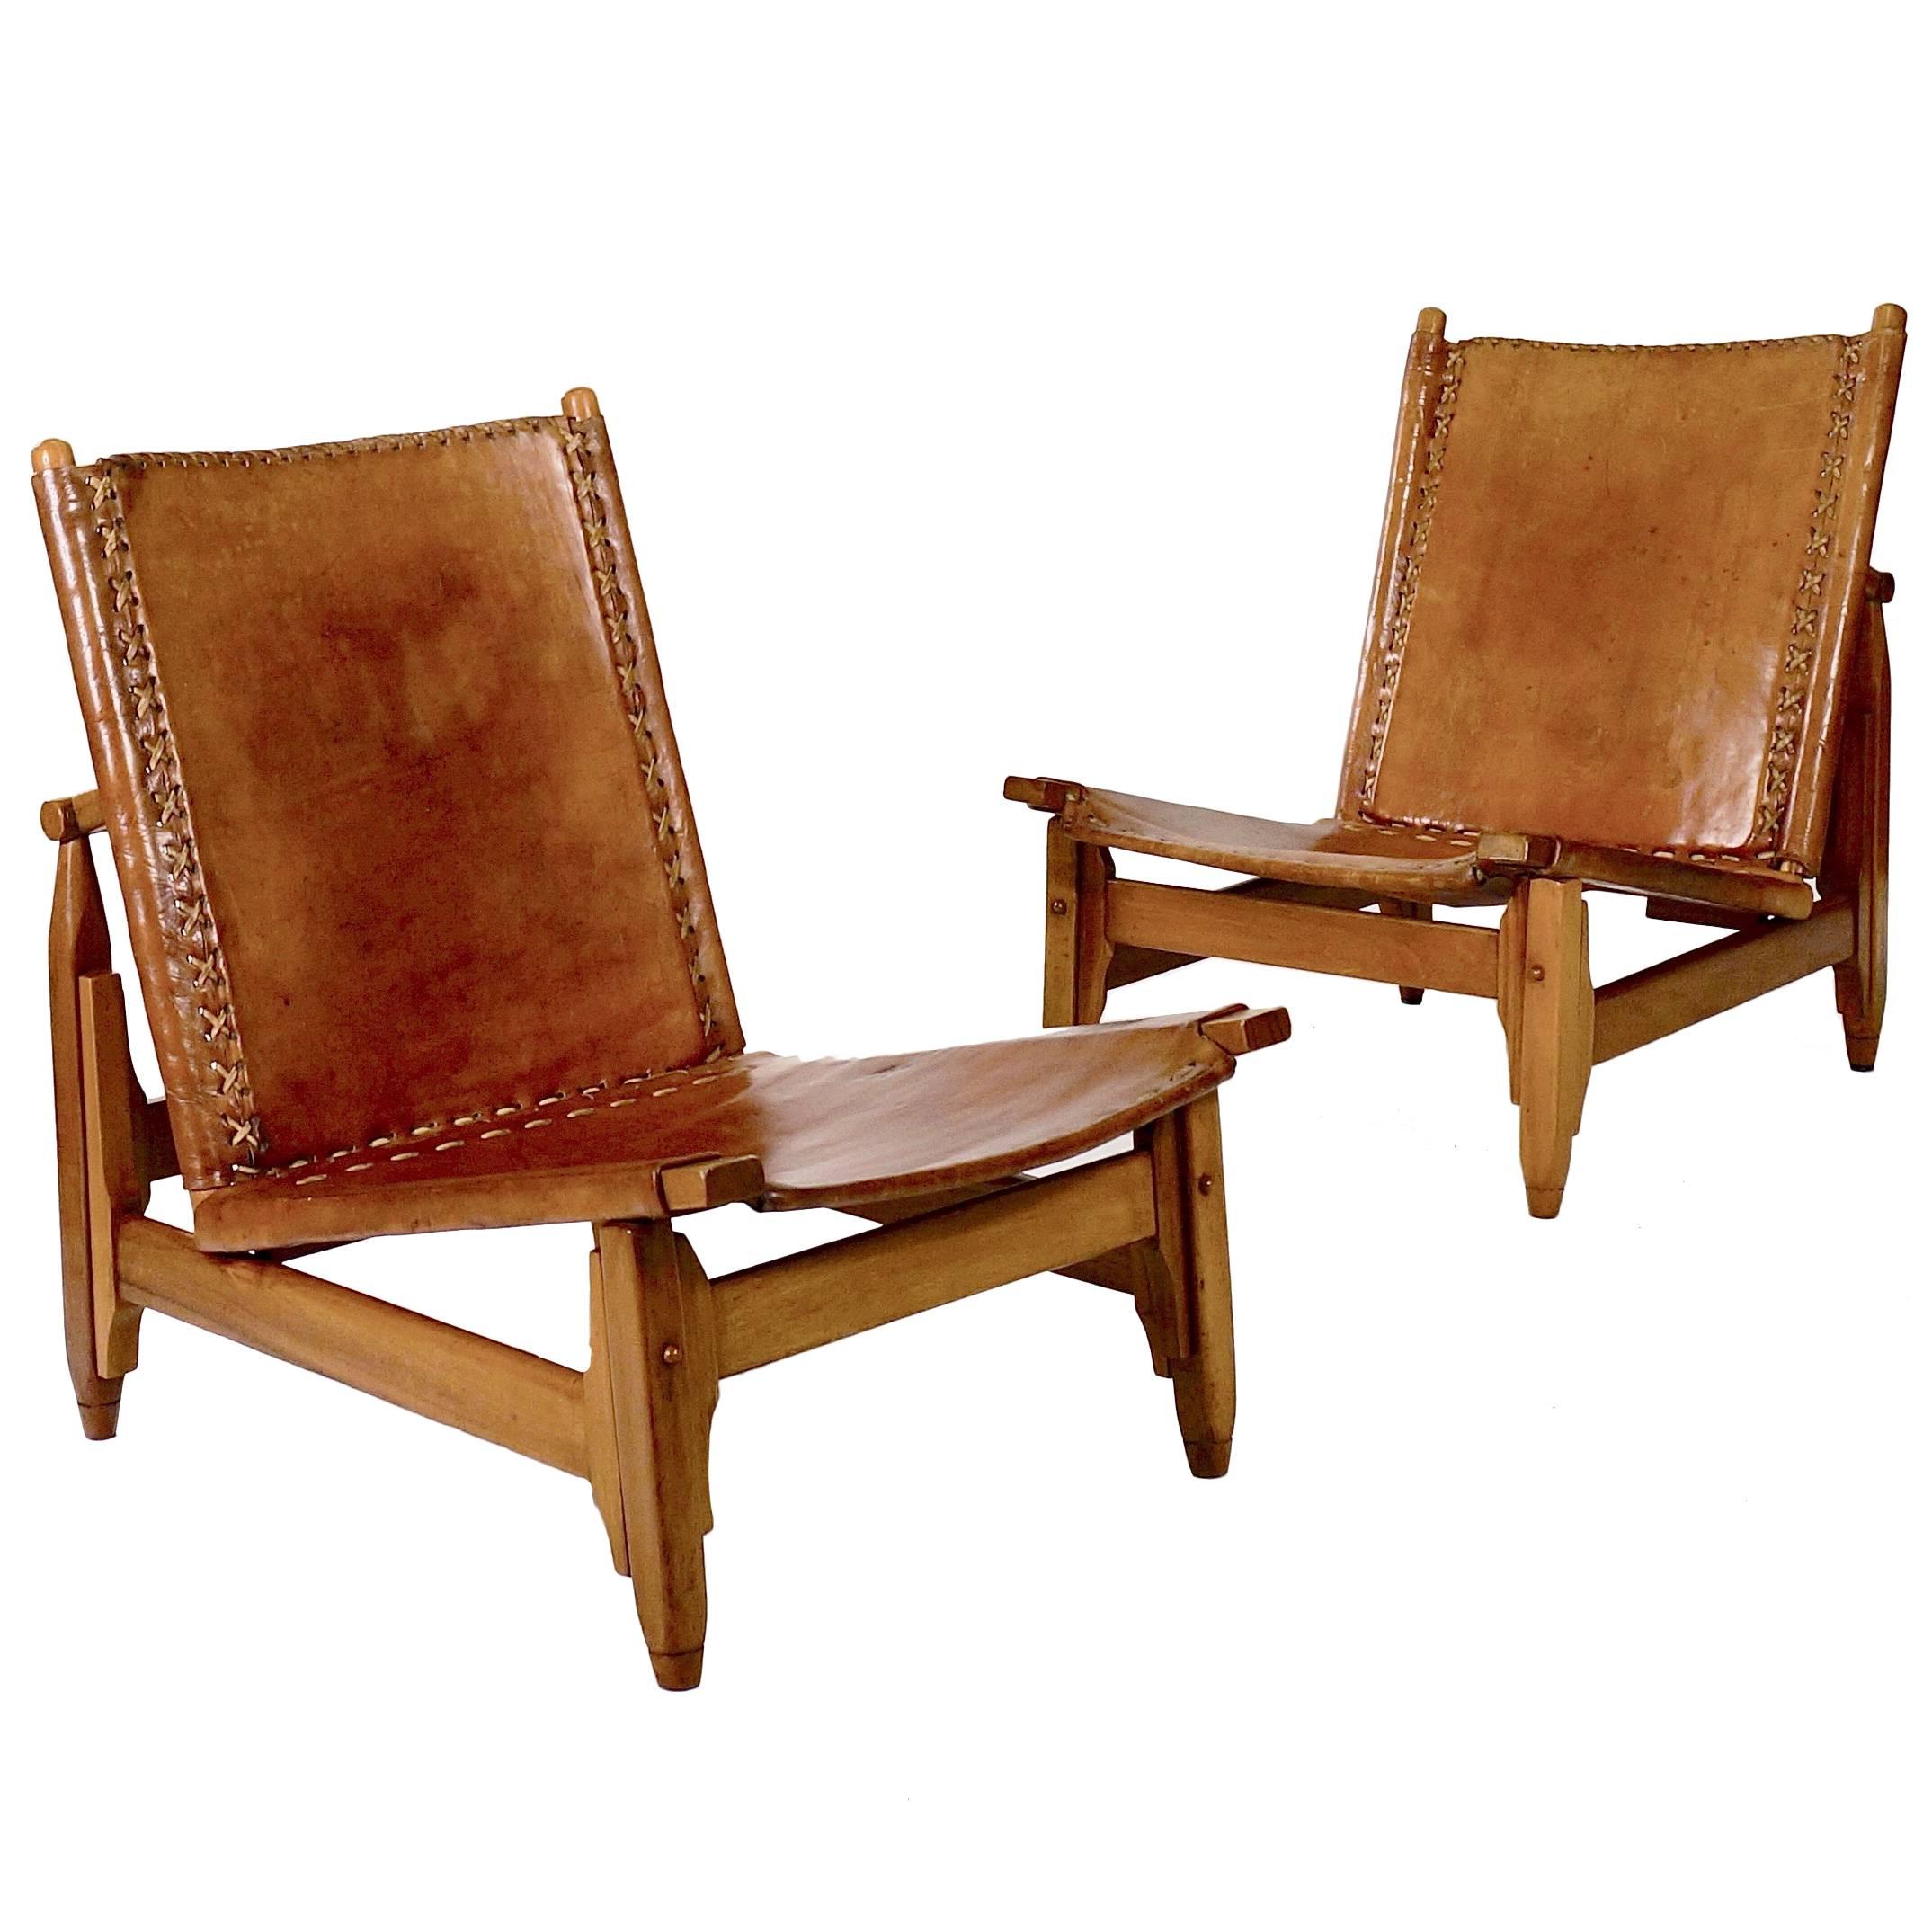 Pair of Saddle-Stitched Leather and Walnut Low Chairs